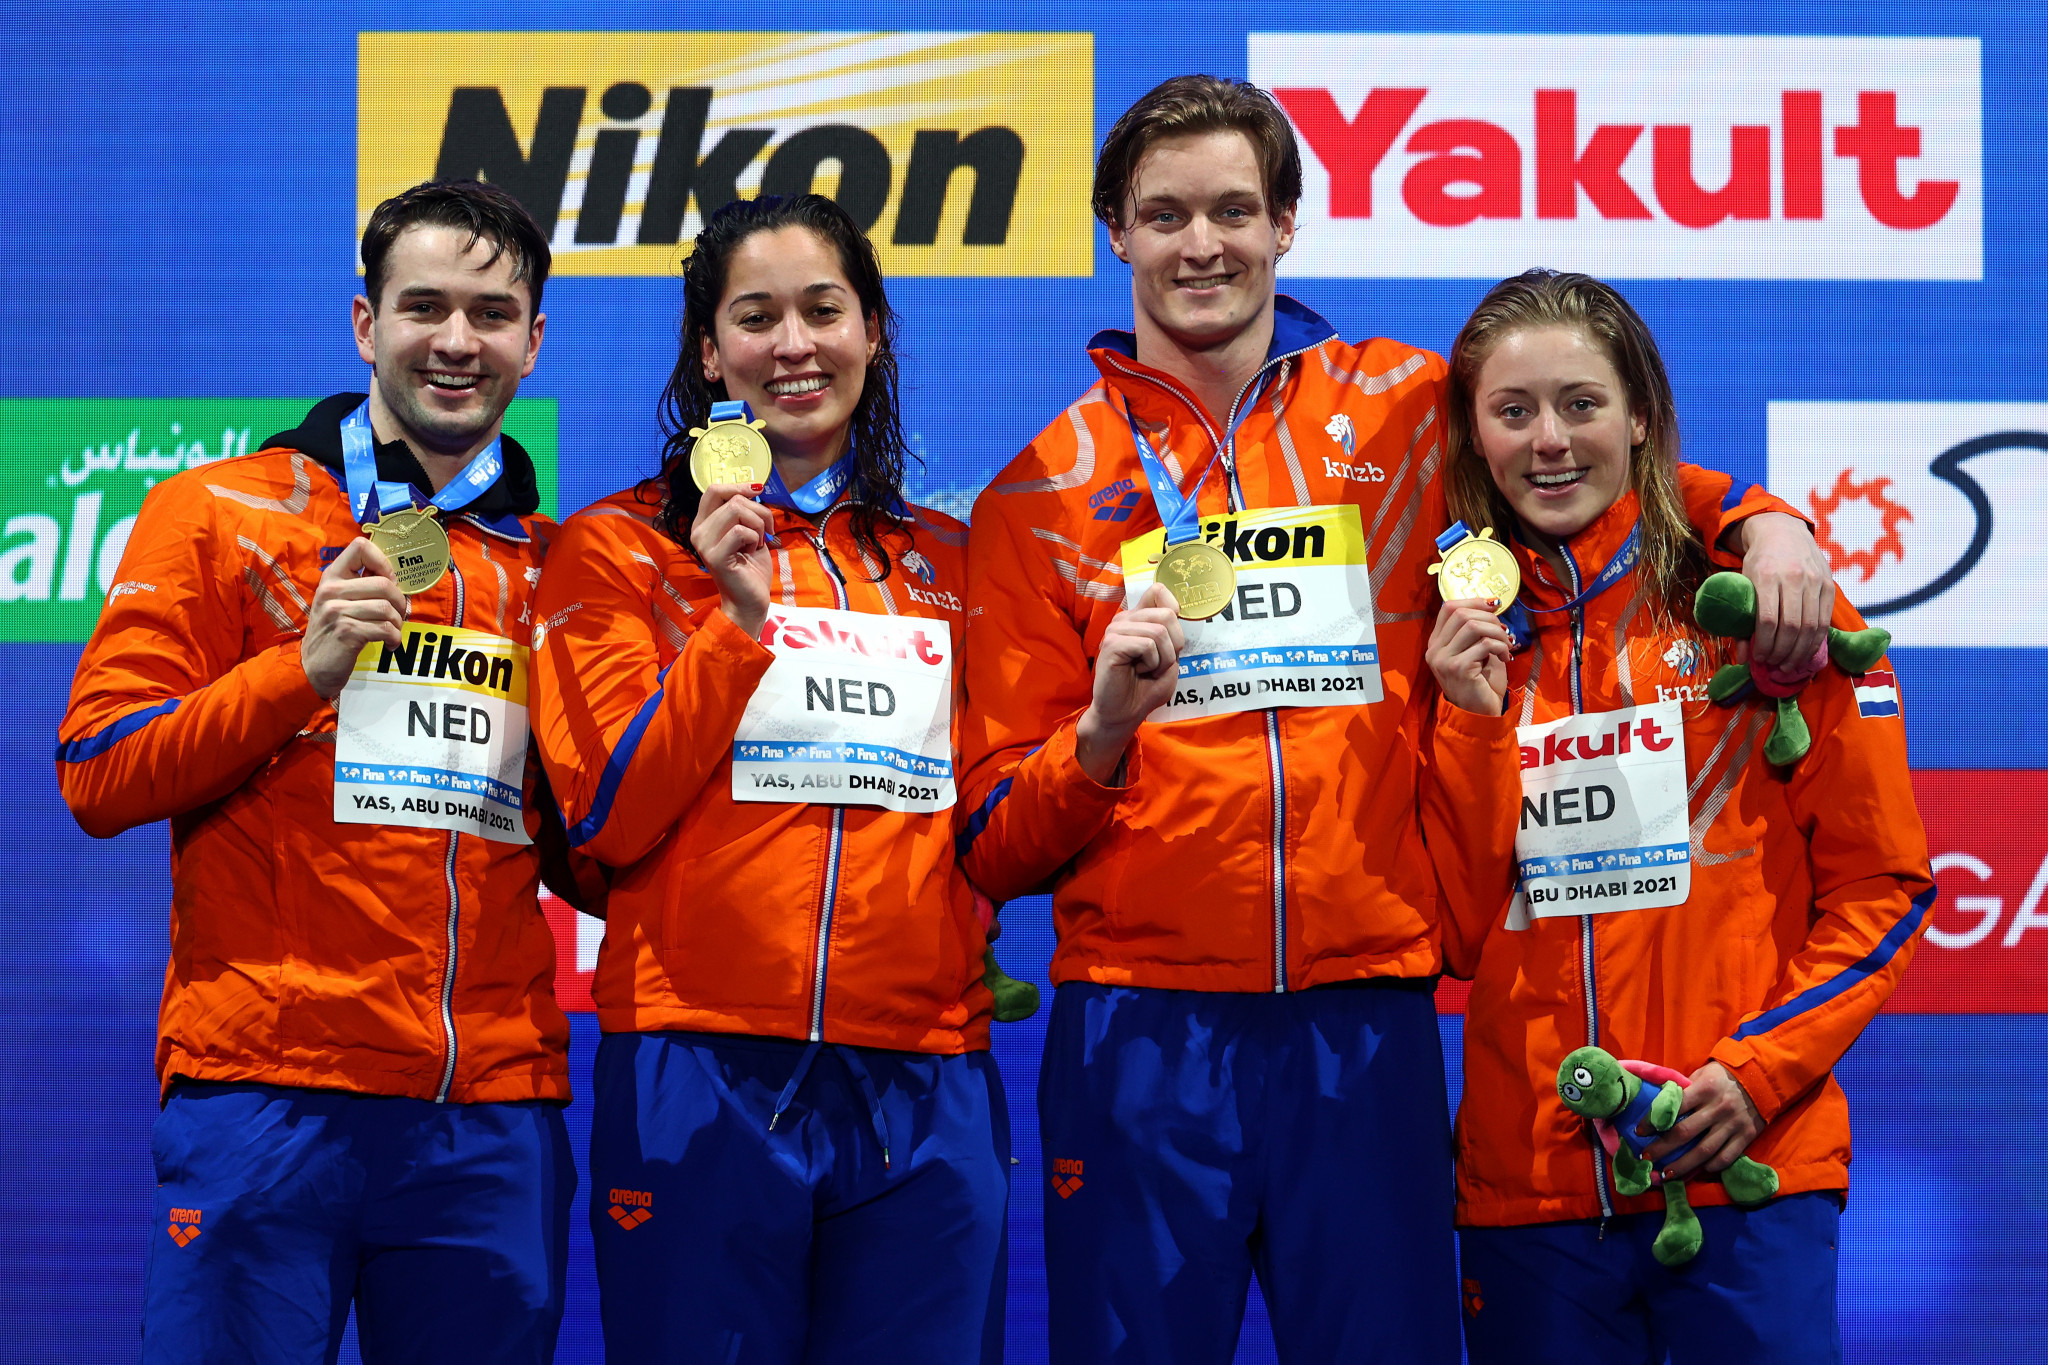 The Dutch team show off their medals after coming from behind to win mixed 4x50m medley relay gold ©Getty Images